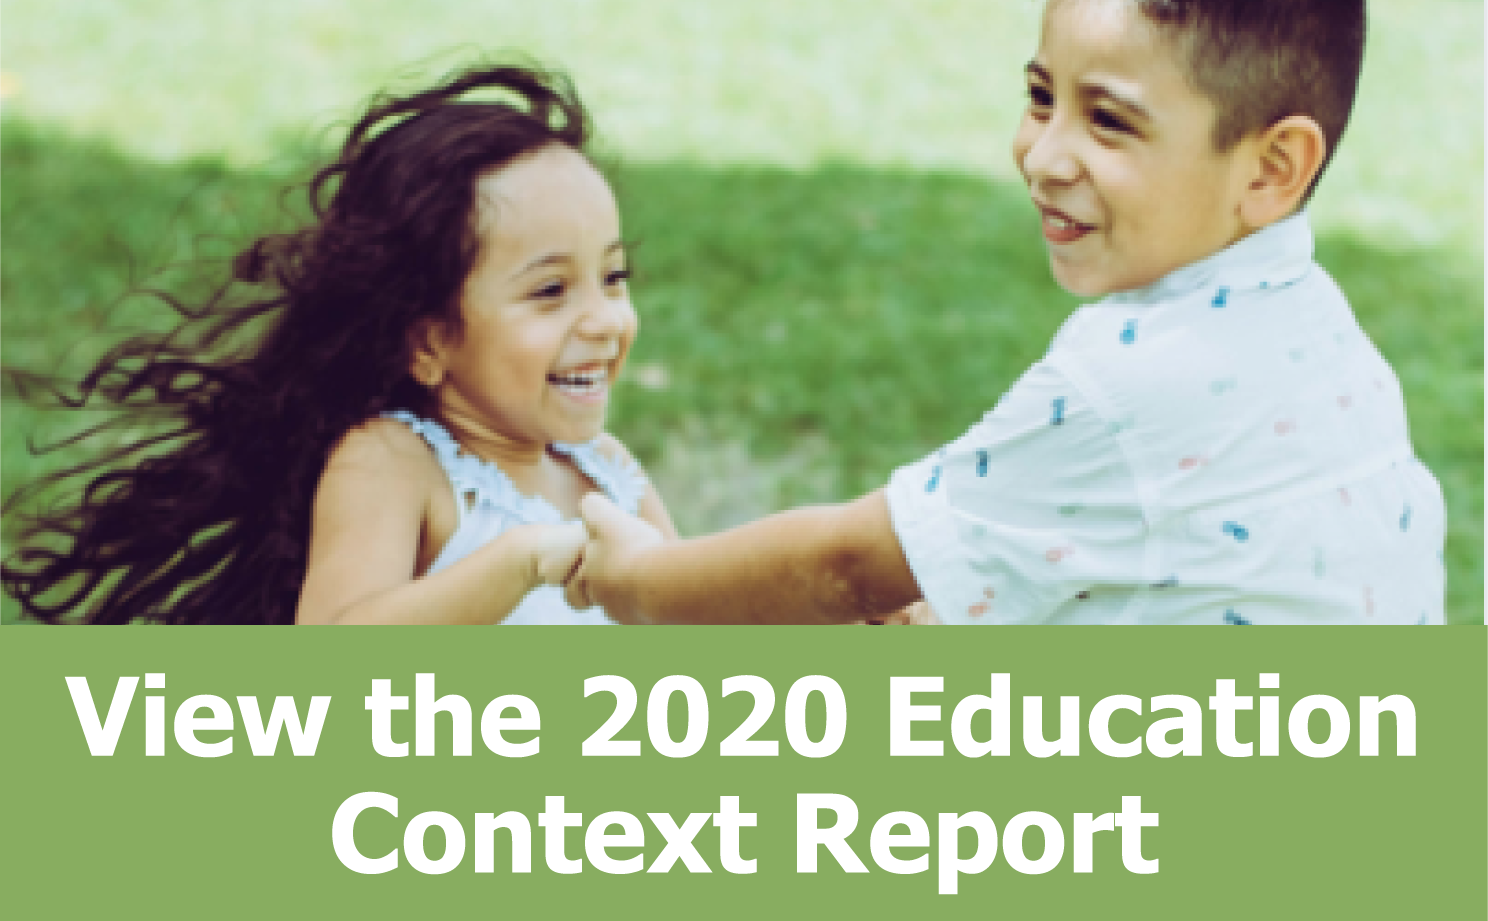 View the 2020 Education Context Report